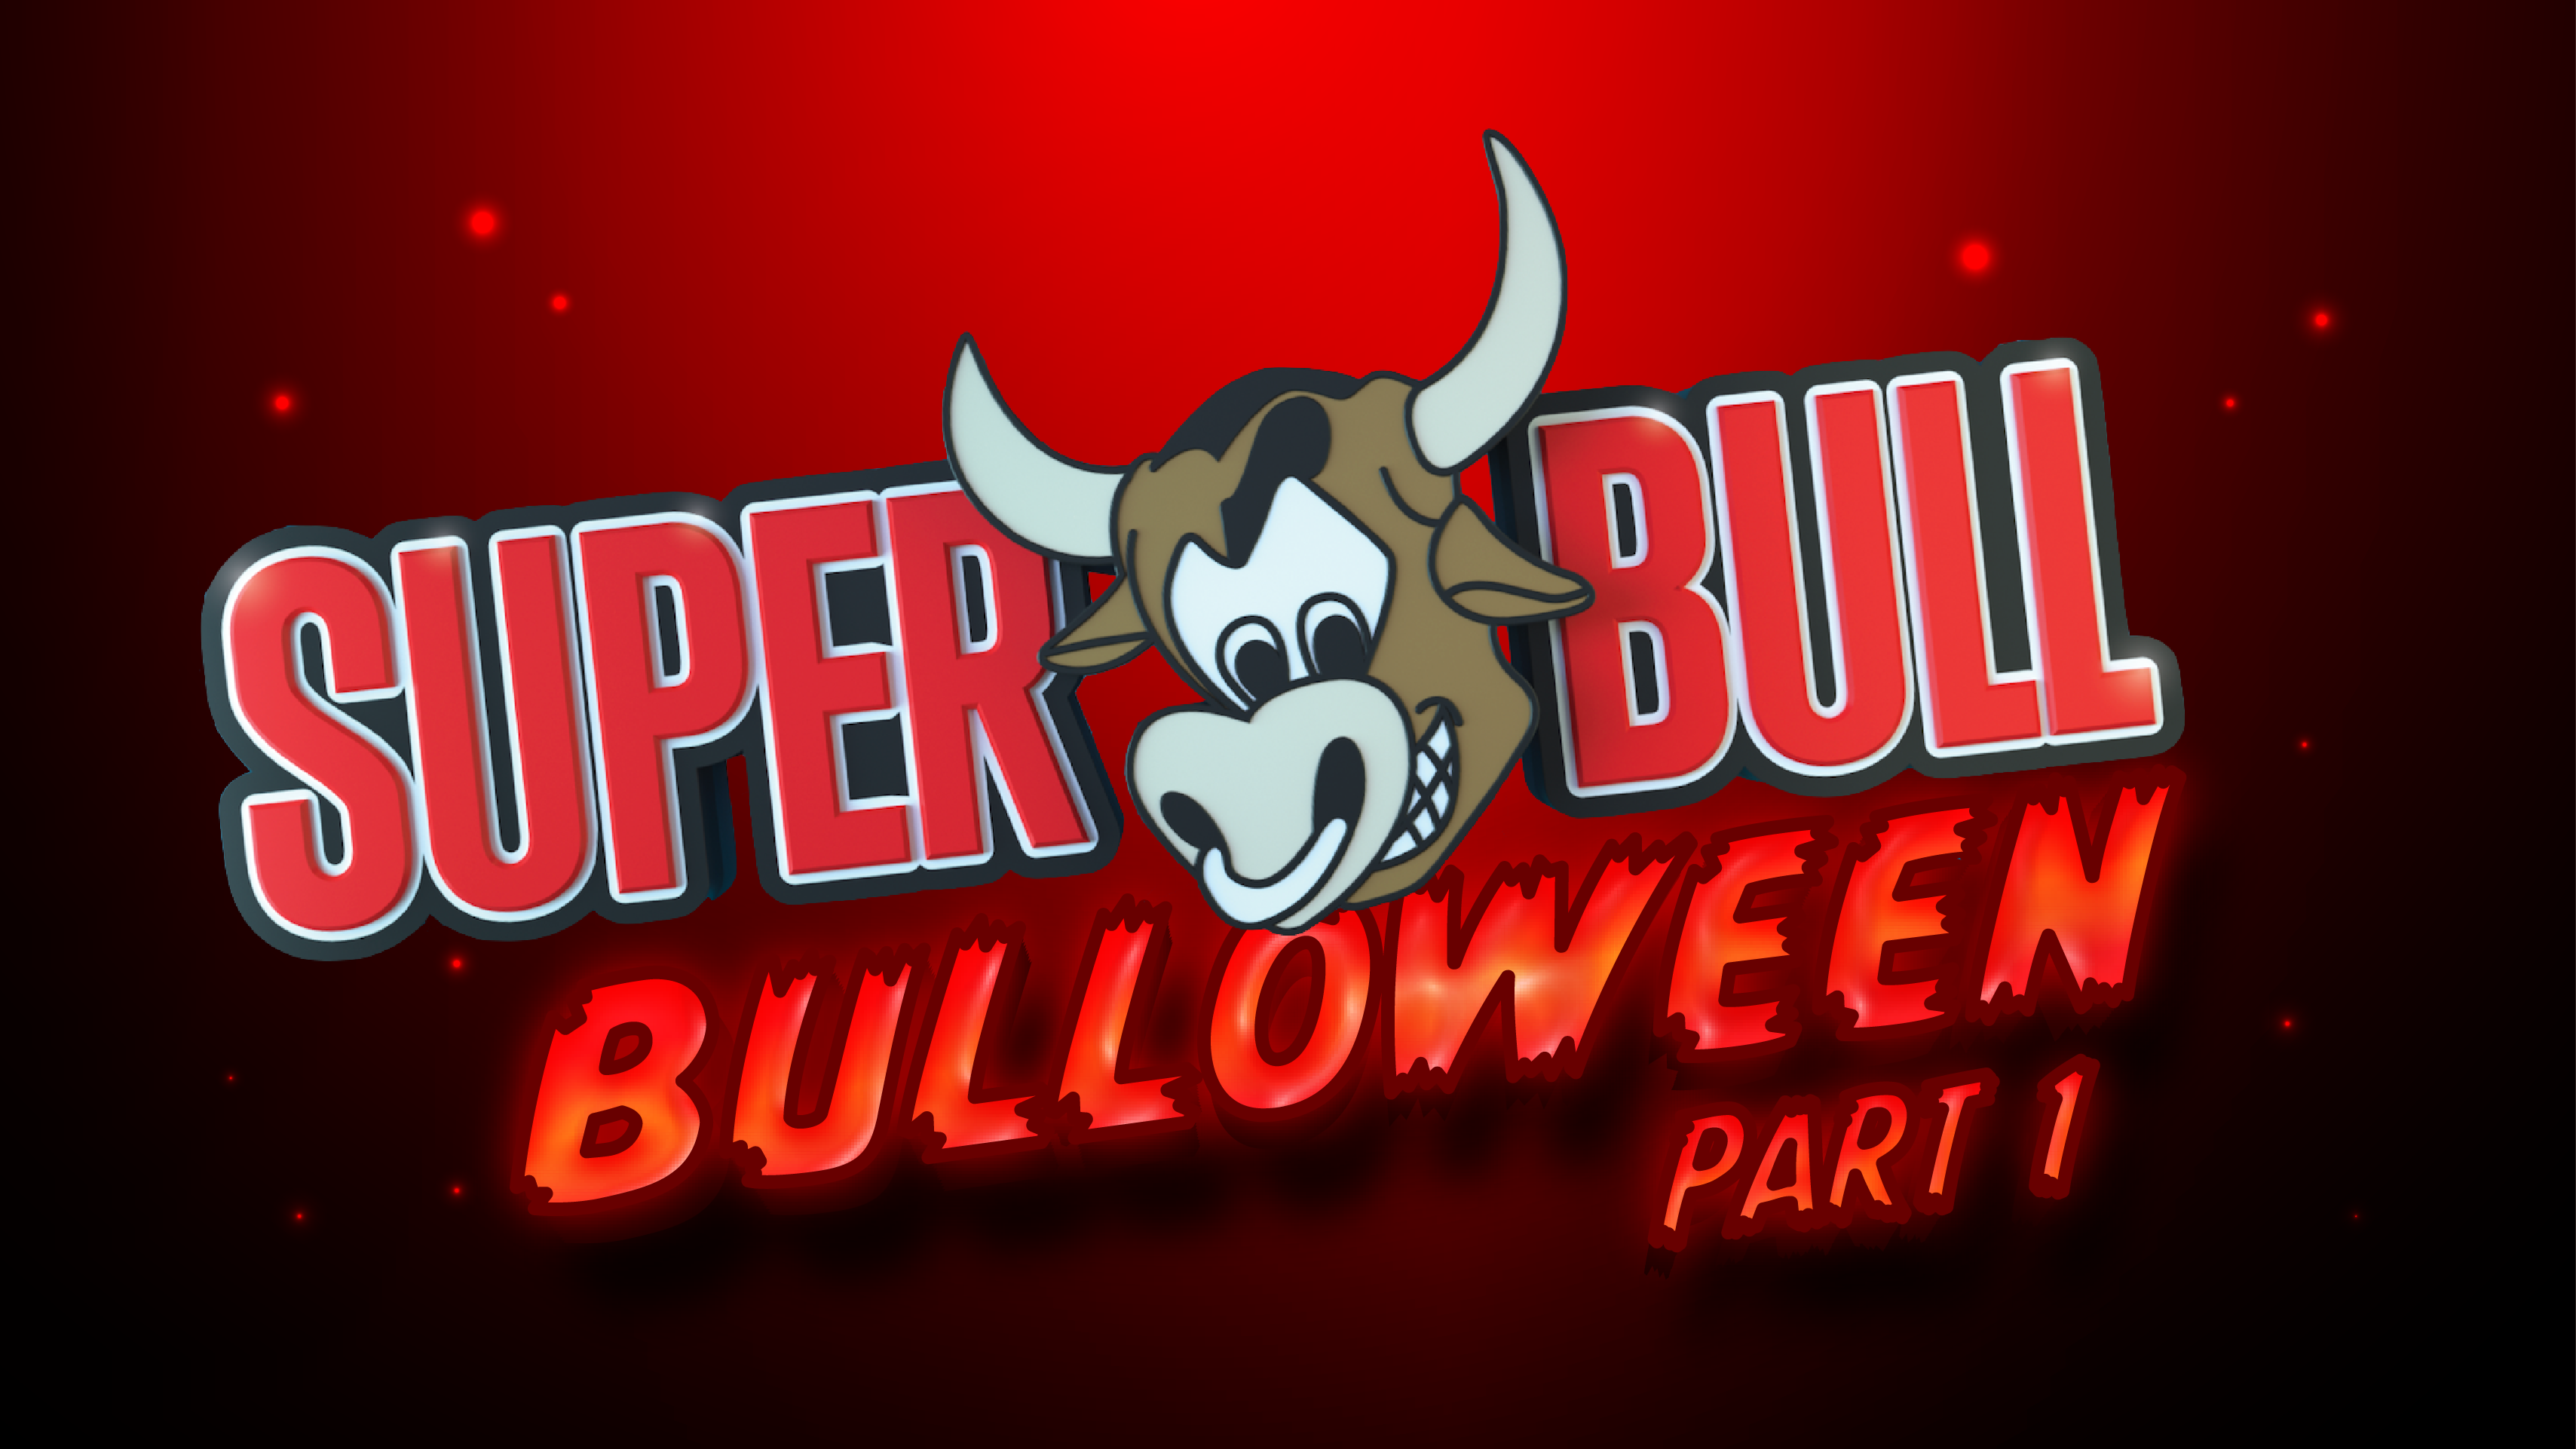 THE SUPERBULL – BULLOWEEN PART 1 – (Sold Out – Spaces On The Door From 10.30pm)